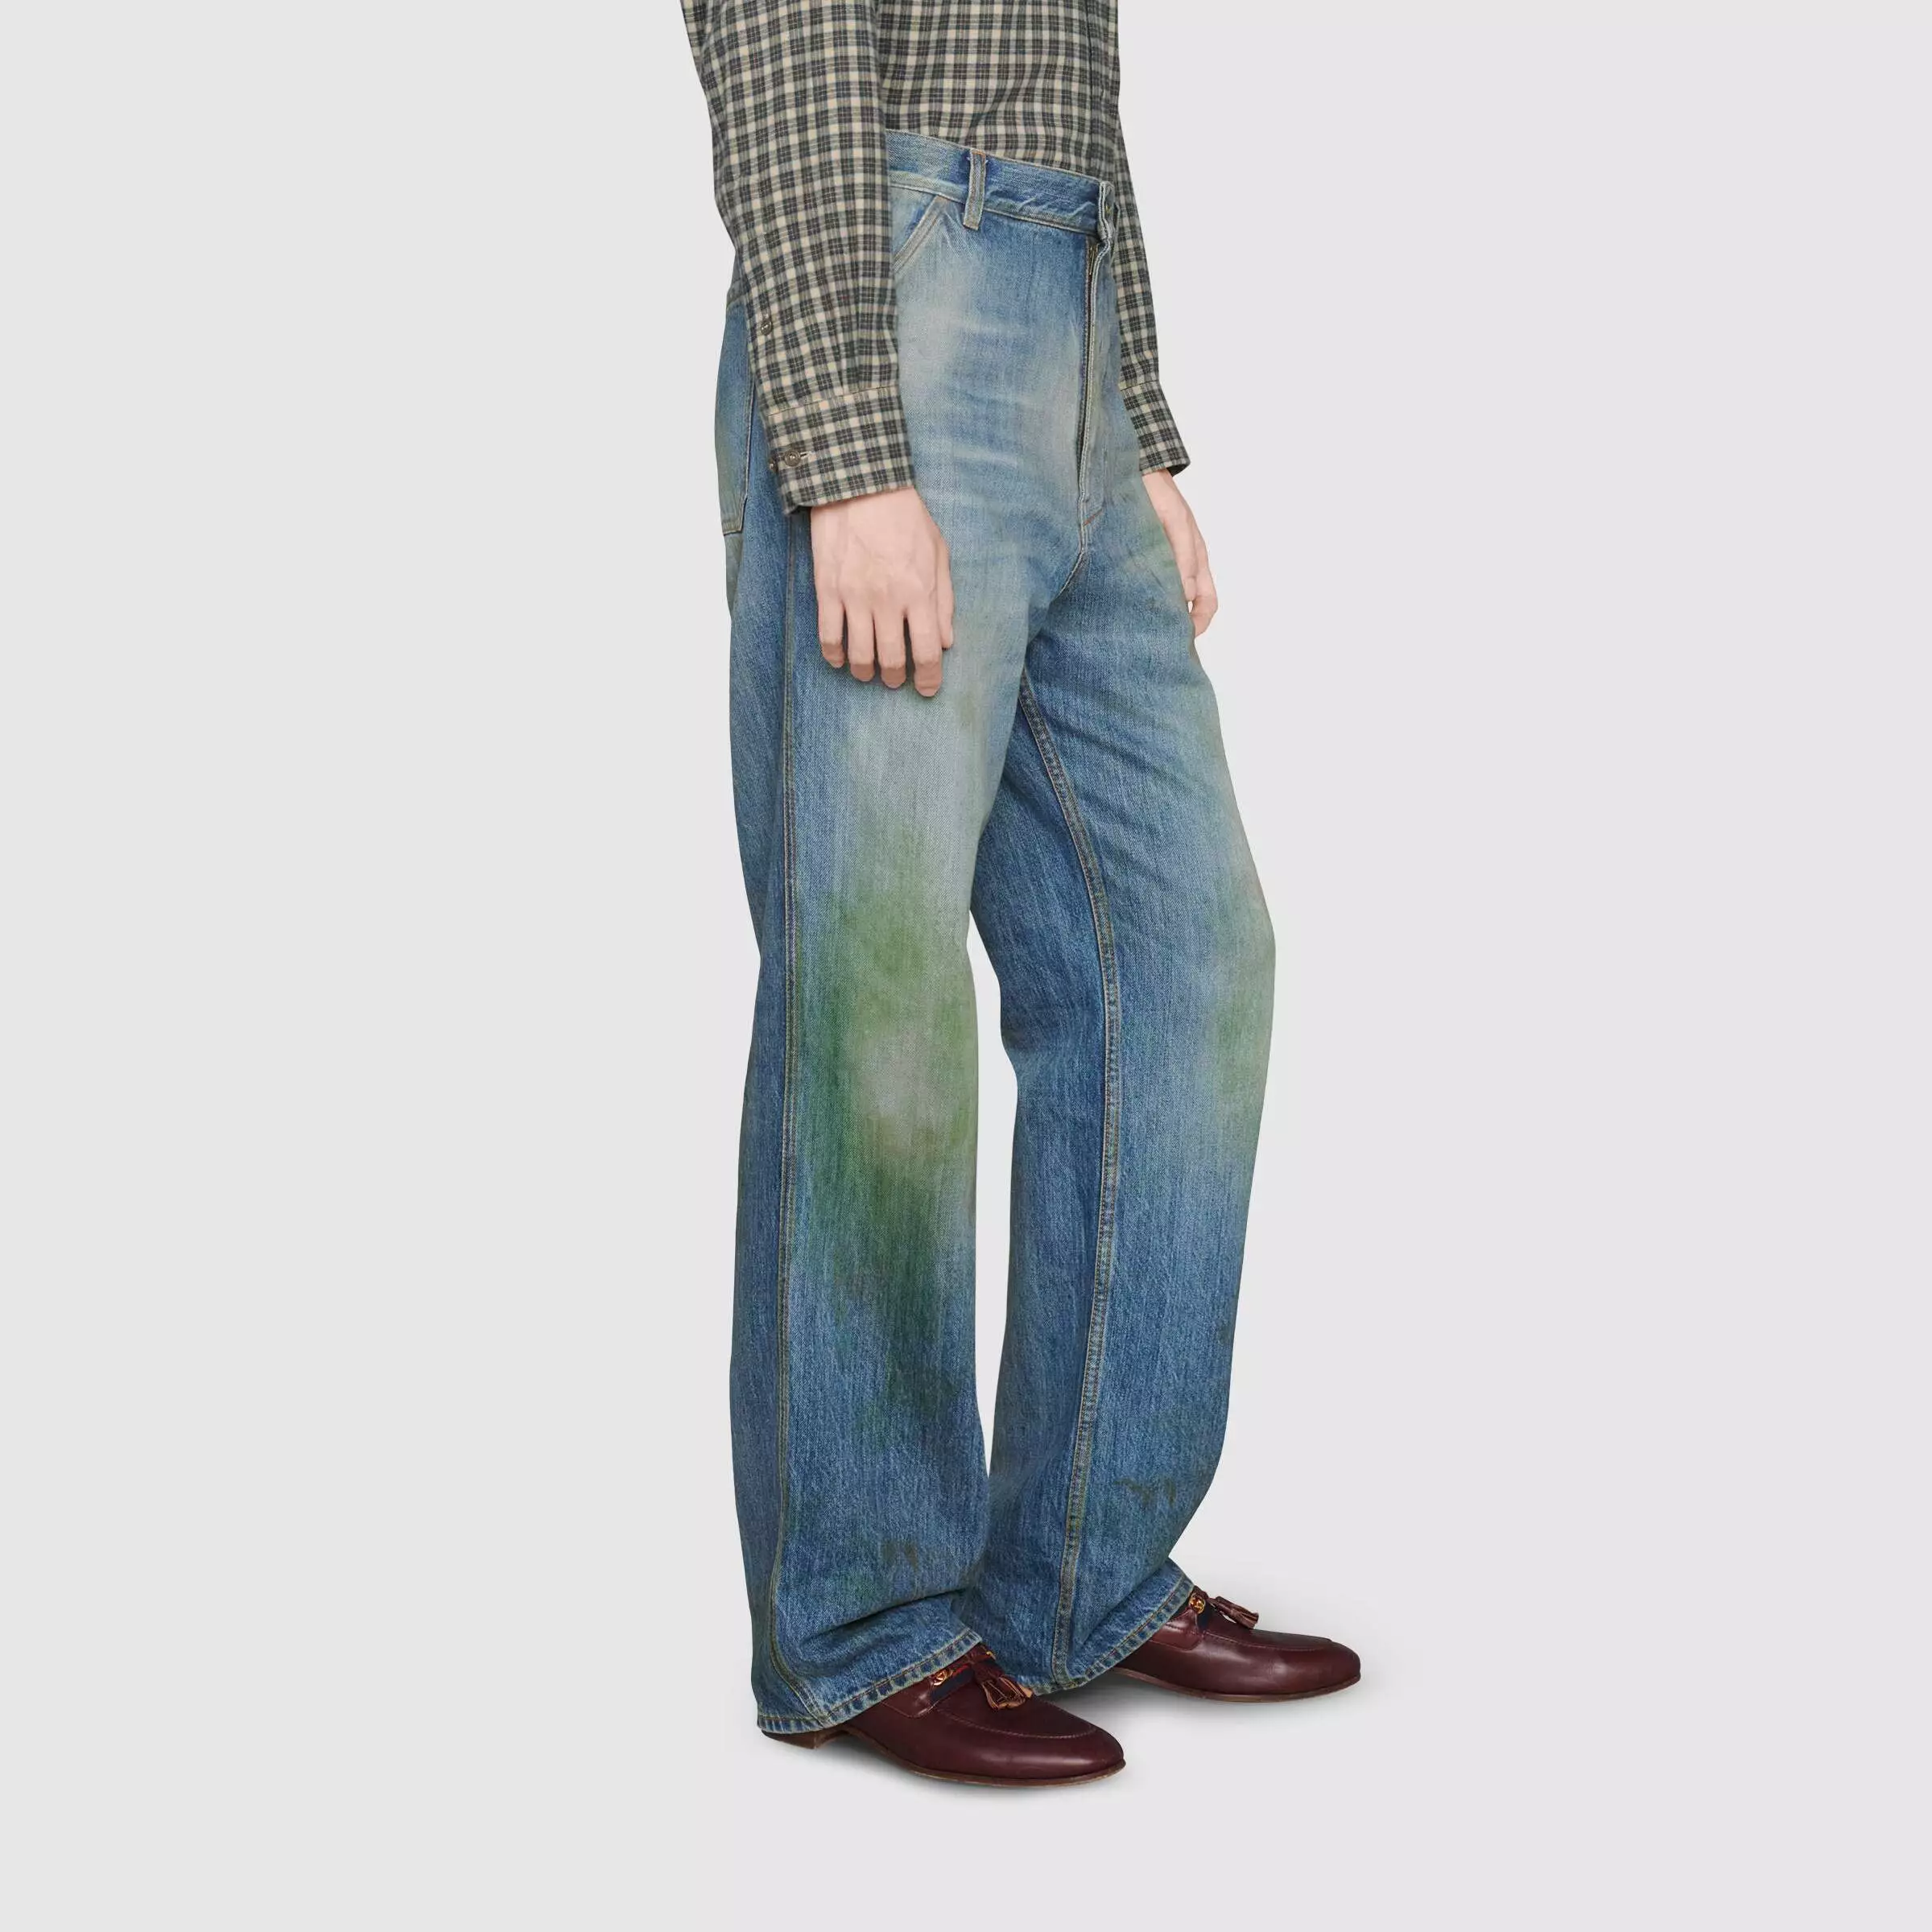 Fancy spending six big ones on grass stained jeans? (